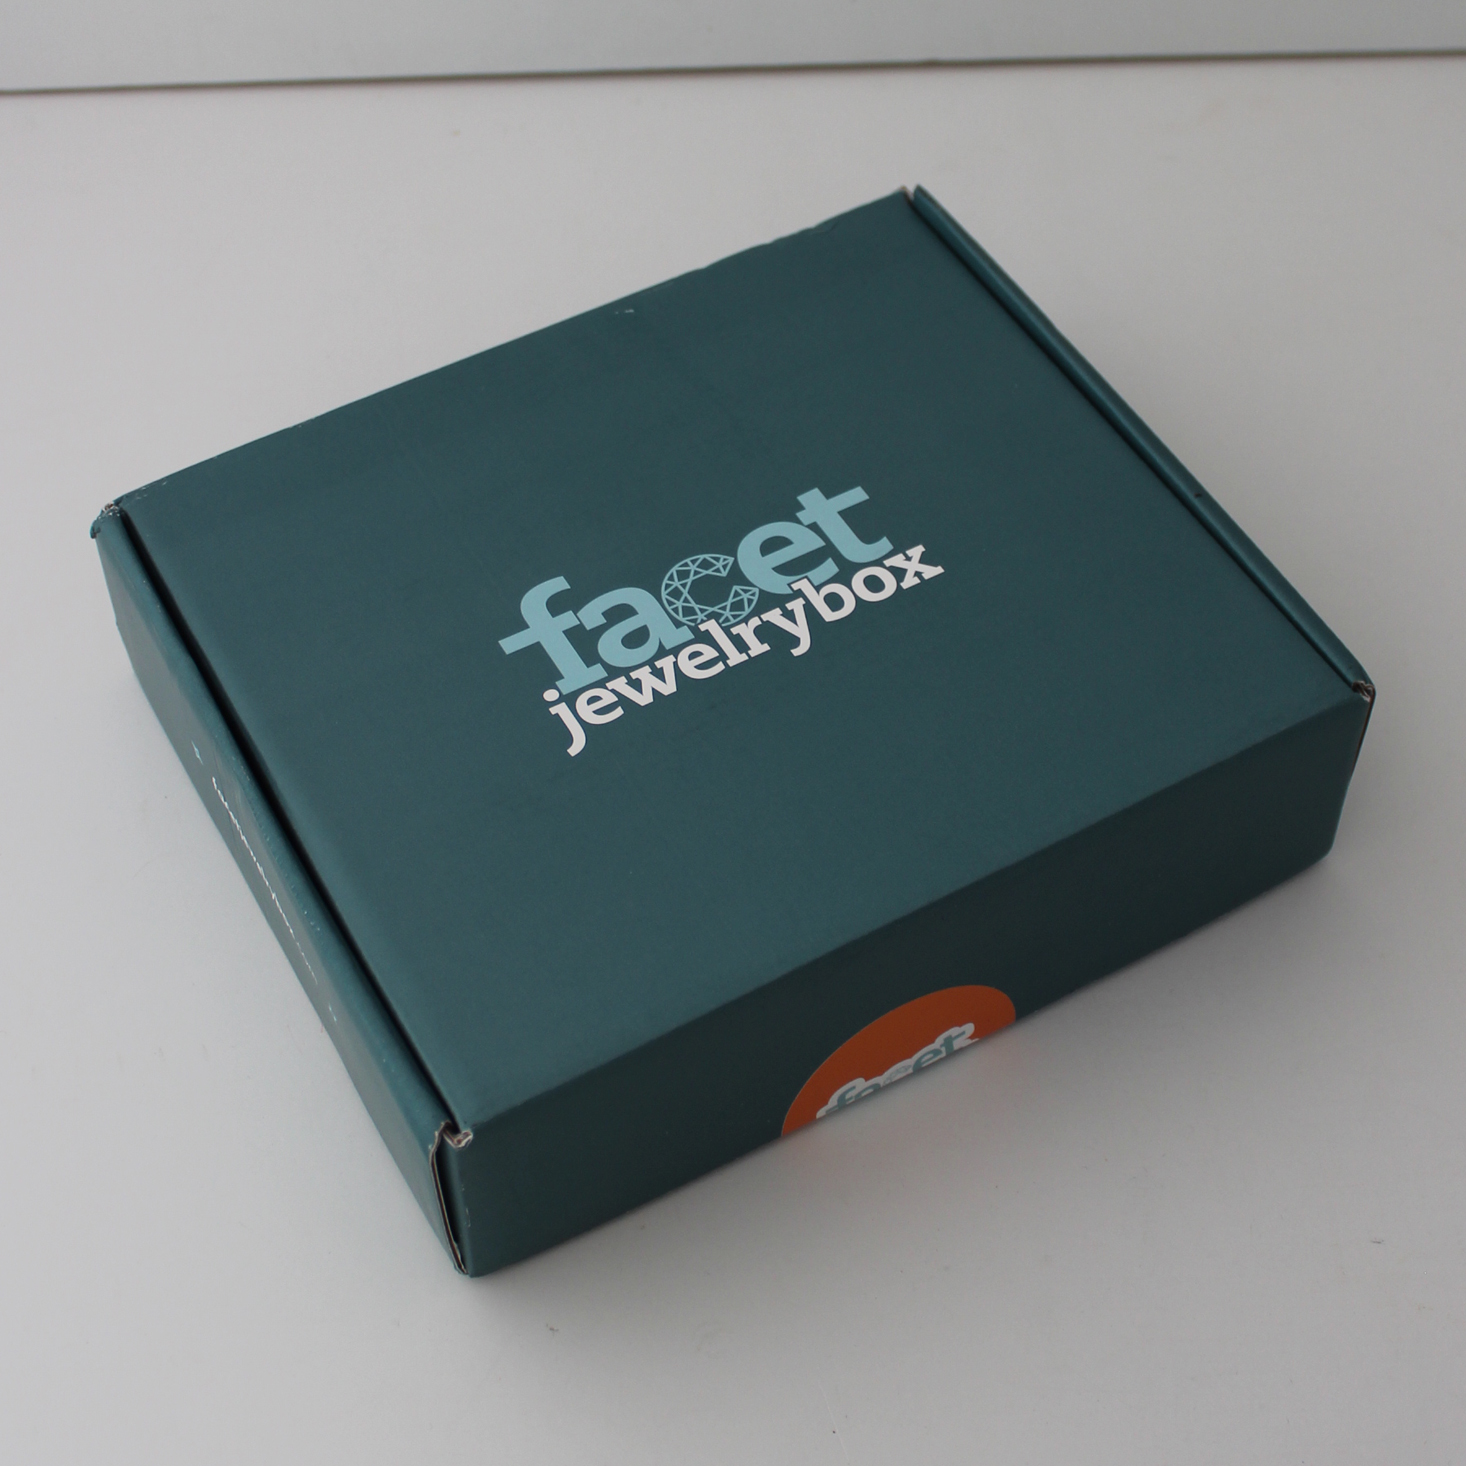 Facet Jewelry Box Bead Stitching Review – August 2019